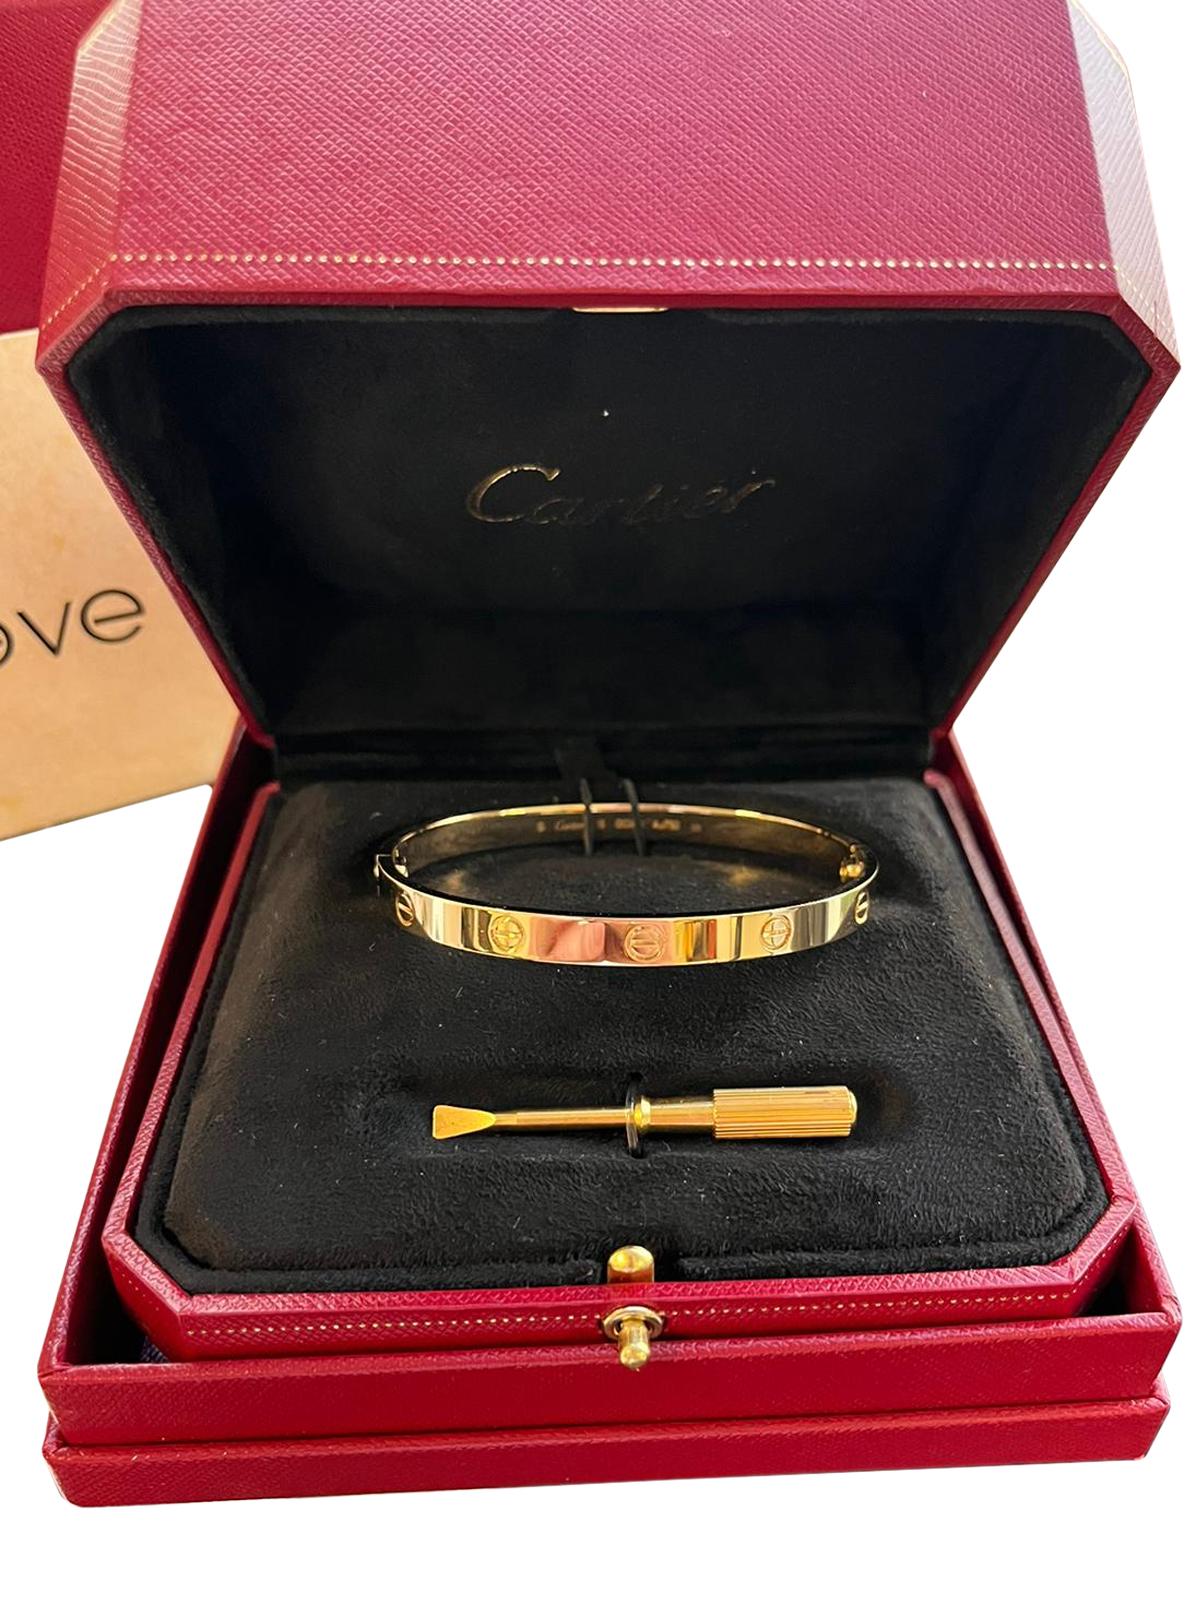 Cartier Love Bracelet 18K Yellow Gold Size 19 With Screwdriver Bangle 4